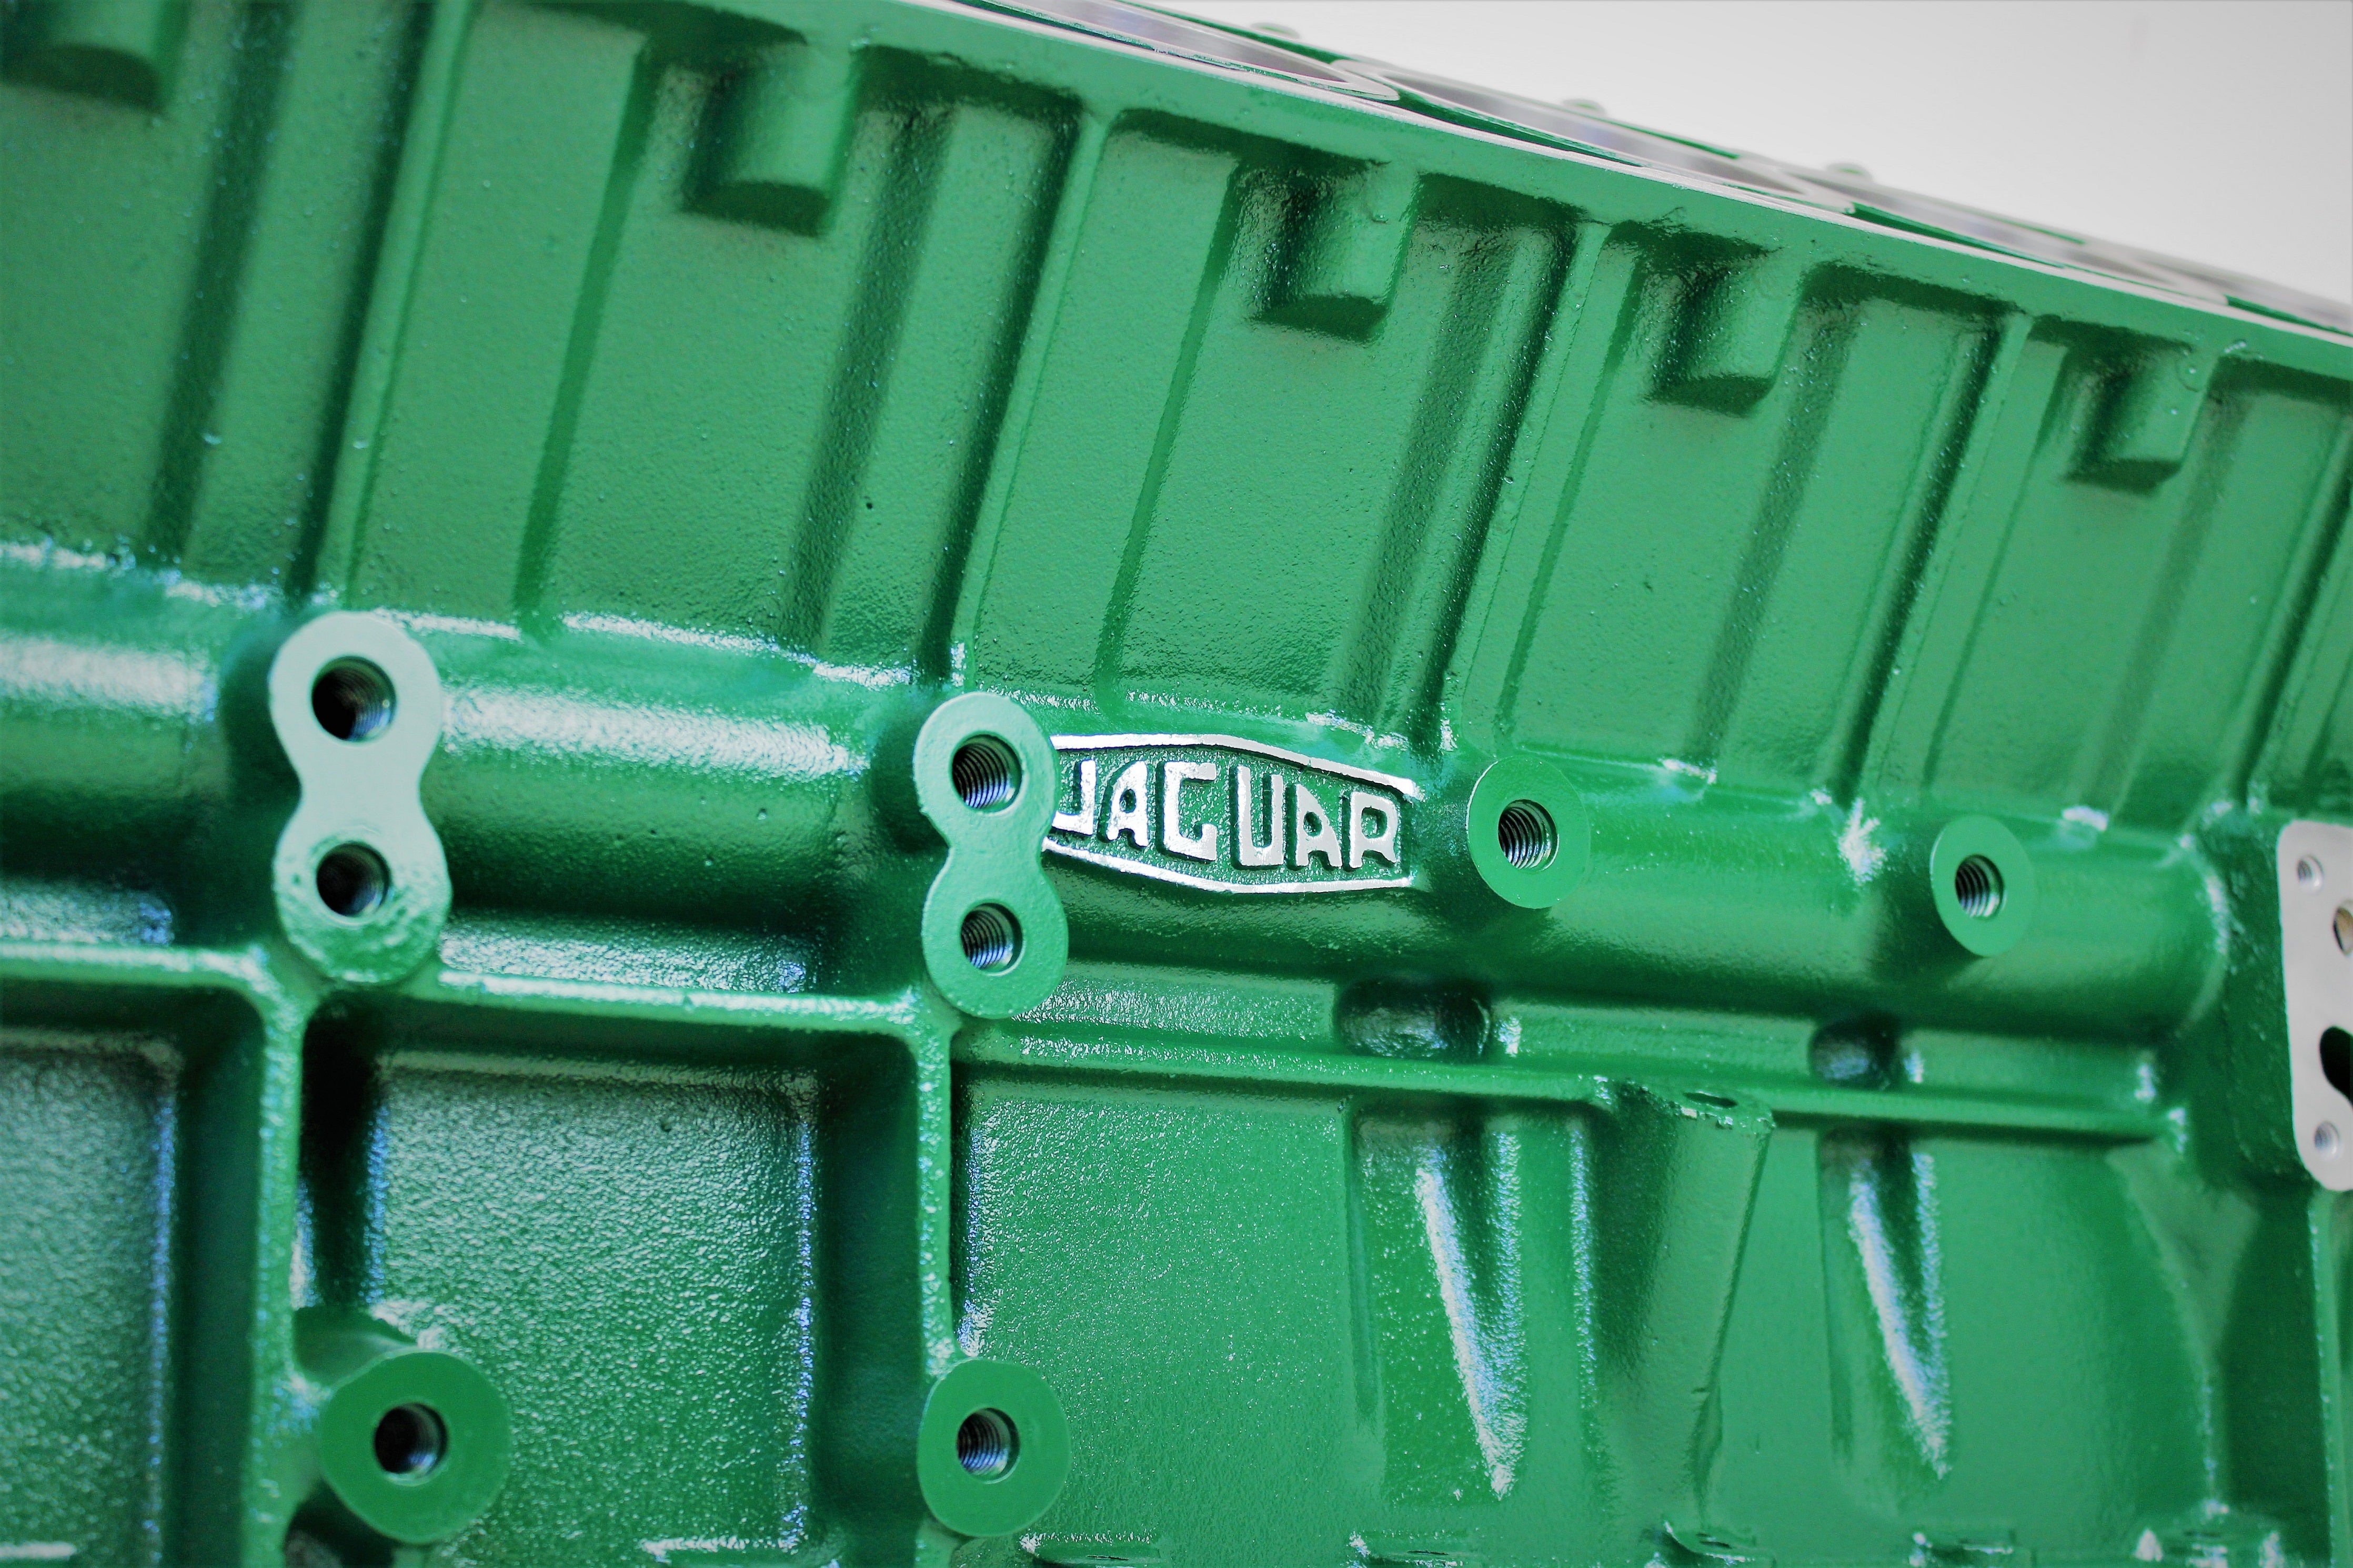 Close-up view of a Jaguar V12 engine block coffee table finished in British Racing Green and the Jaguar logo displayed in the center.